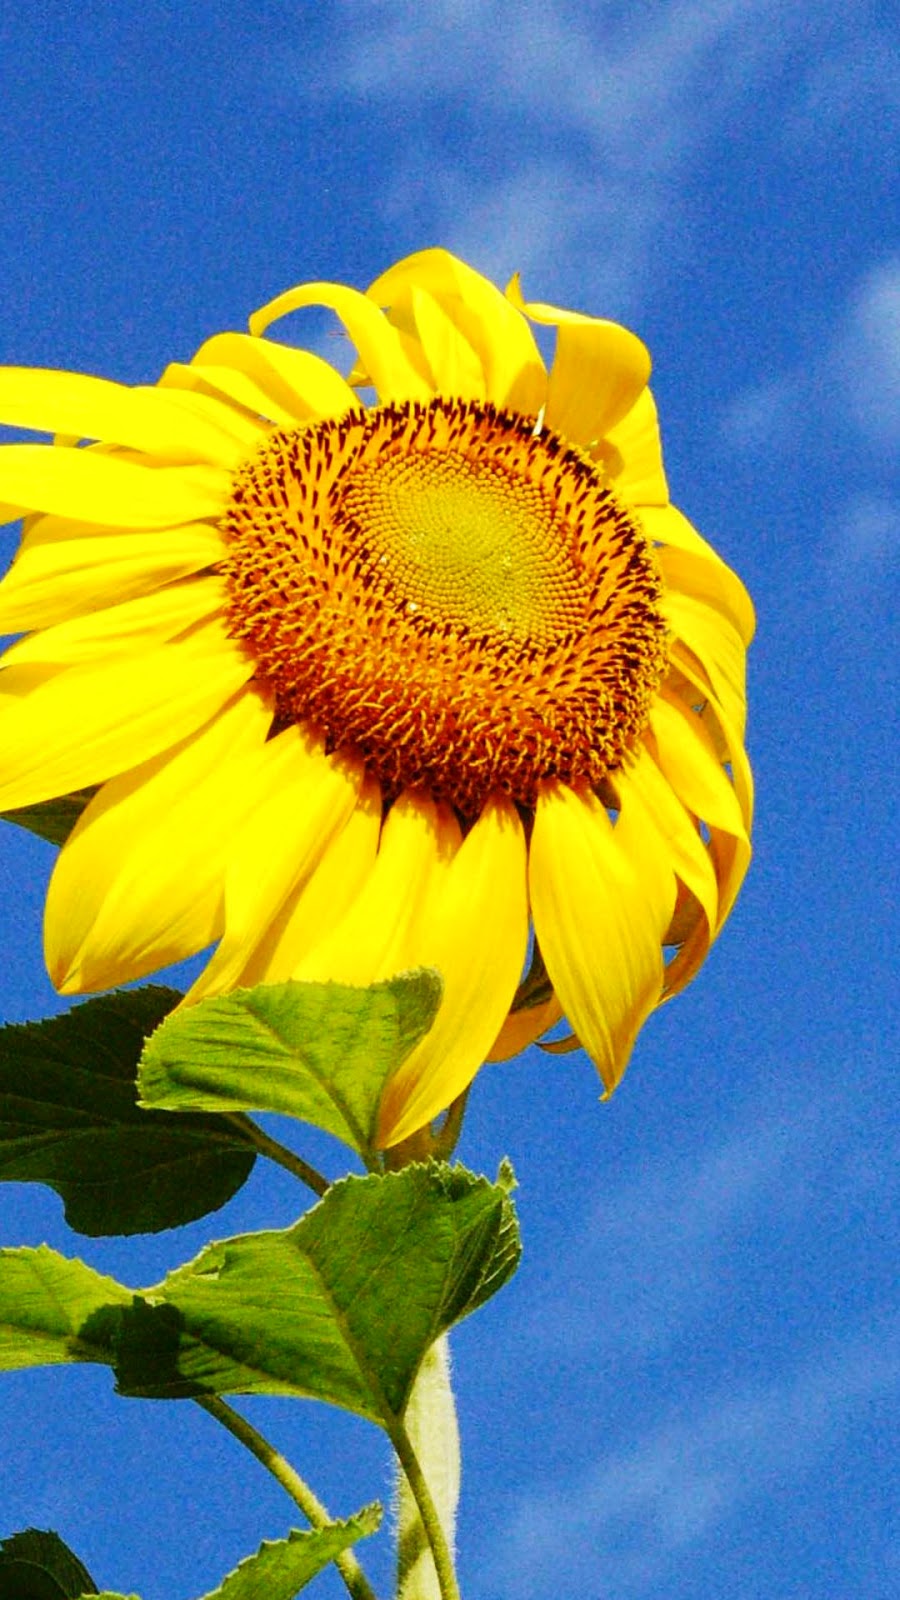 Yellow Sunflower IPhone 6 Wallpaper IPhone 6 Wallpapers HD